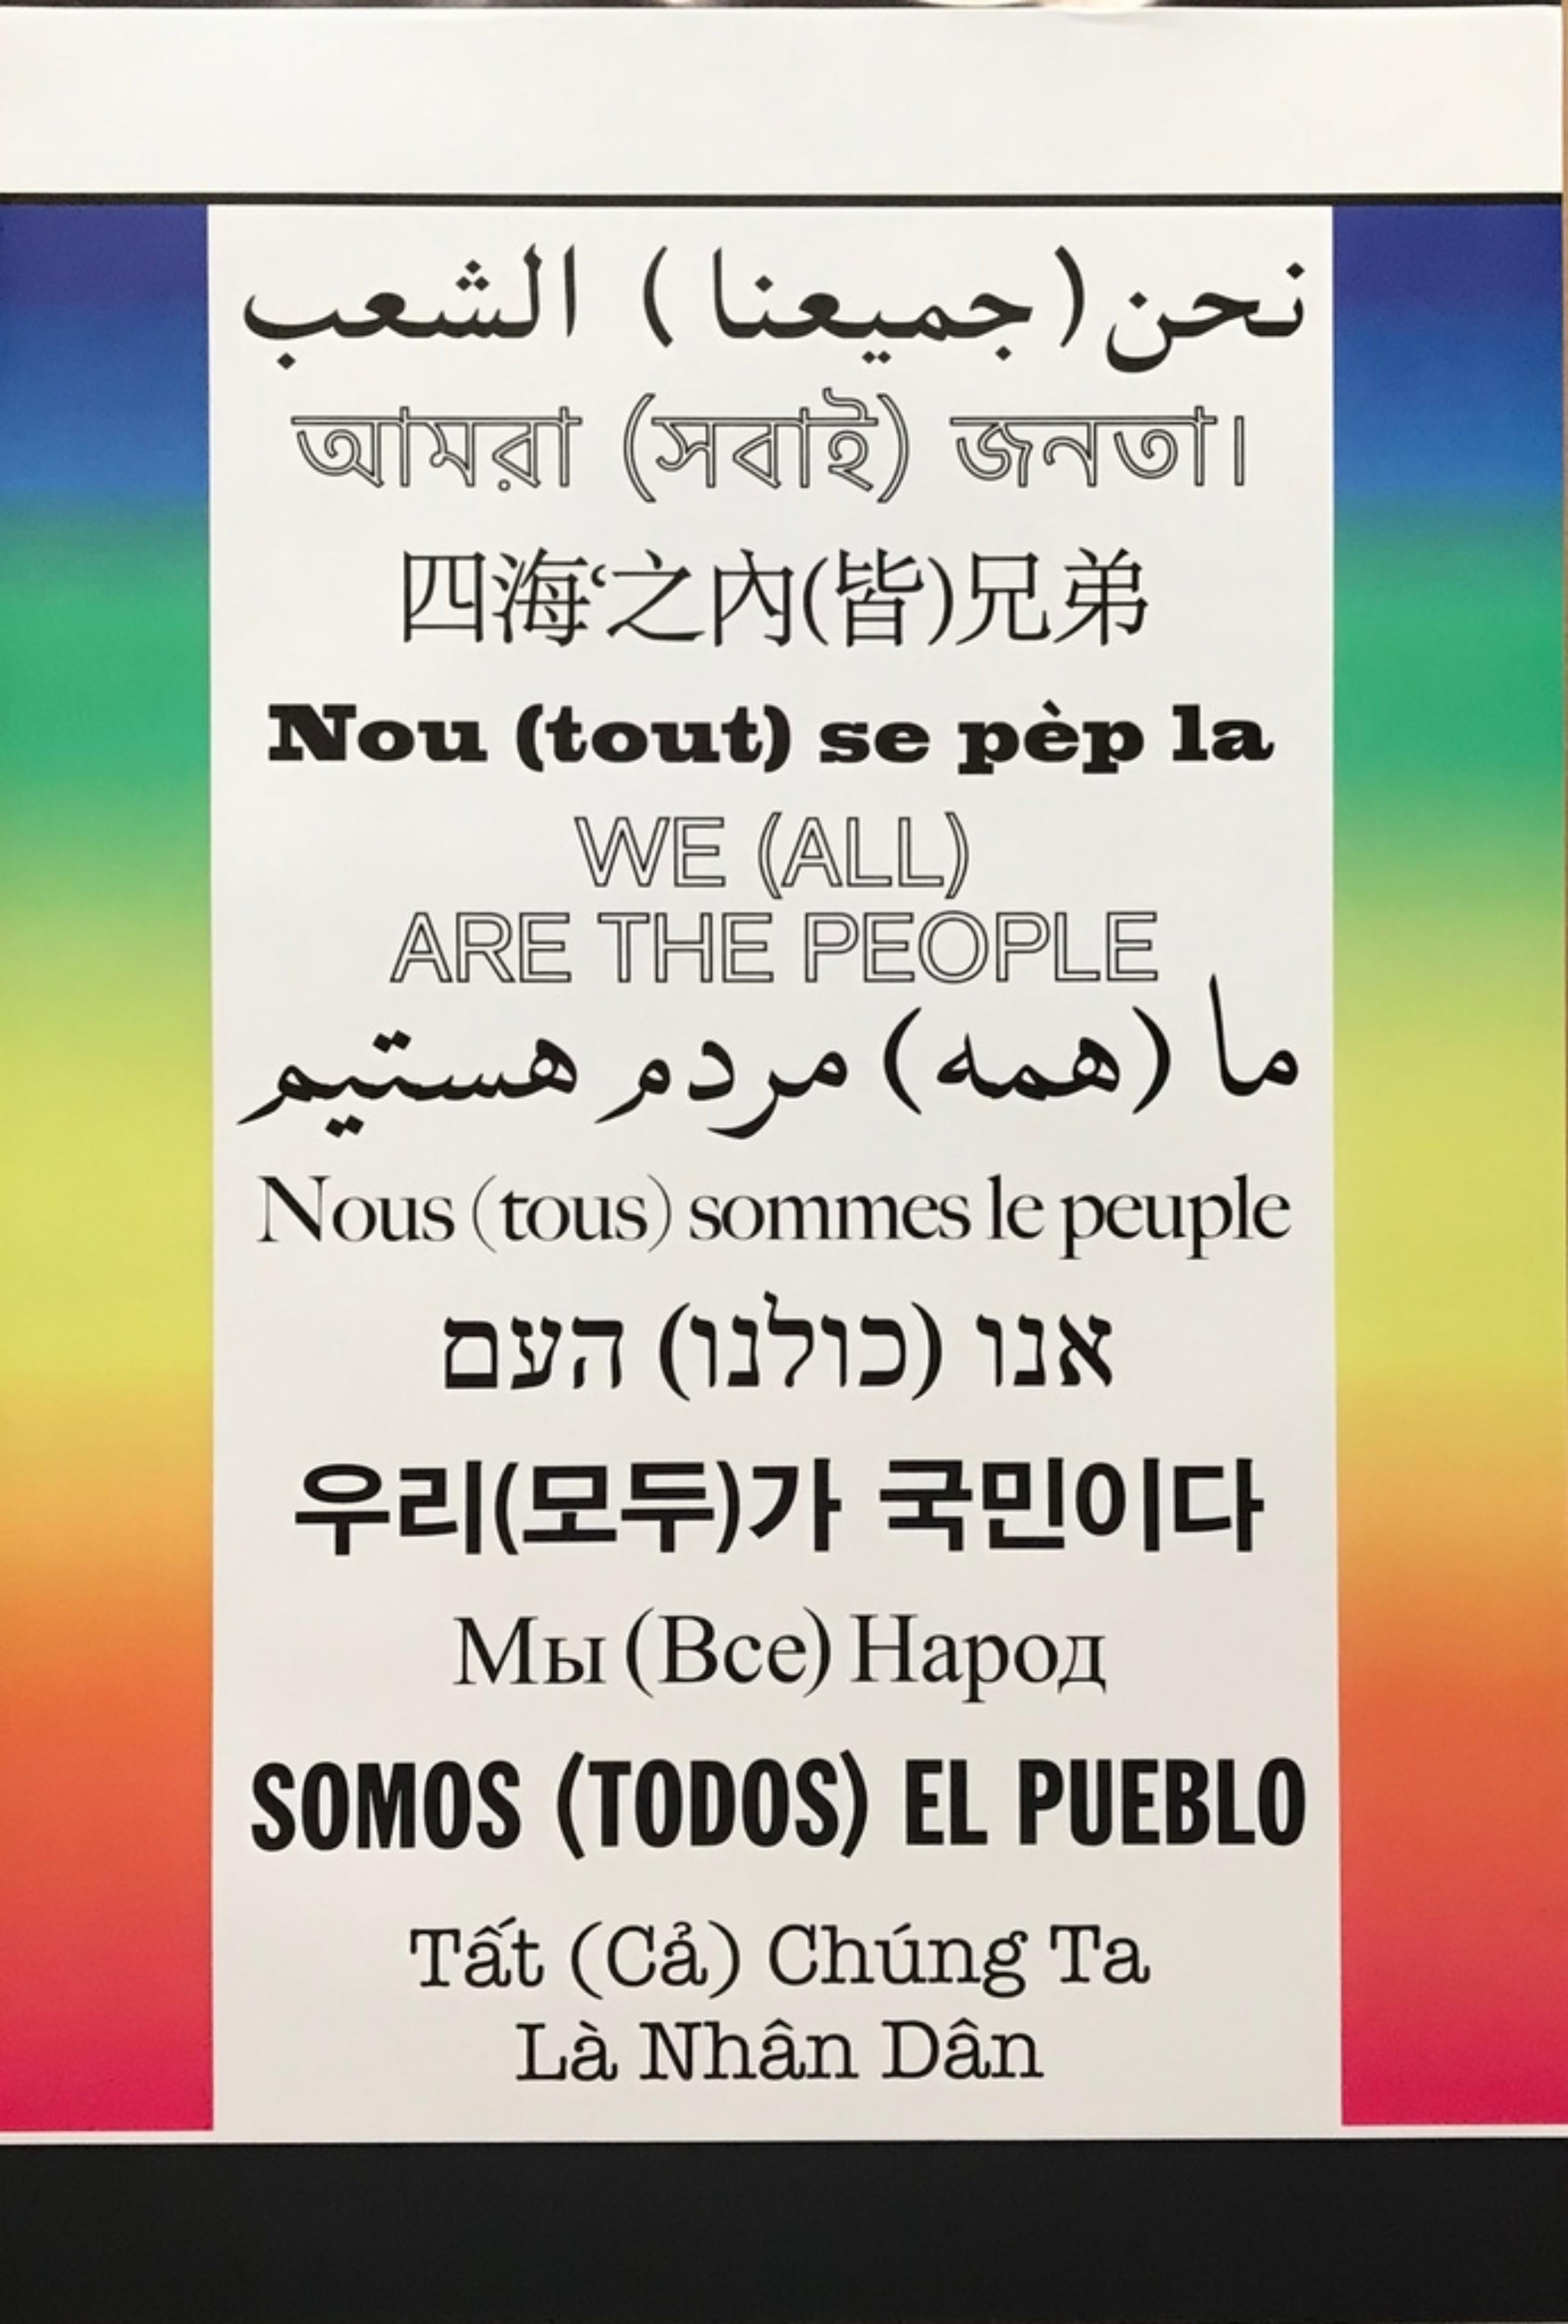 Hans Haacke  Abstract Print - Wir (Alle) Sind Das Volk—We (all) Are The People - many languages peace poster